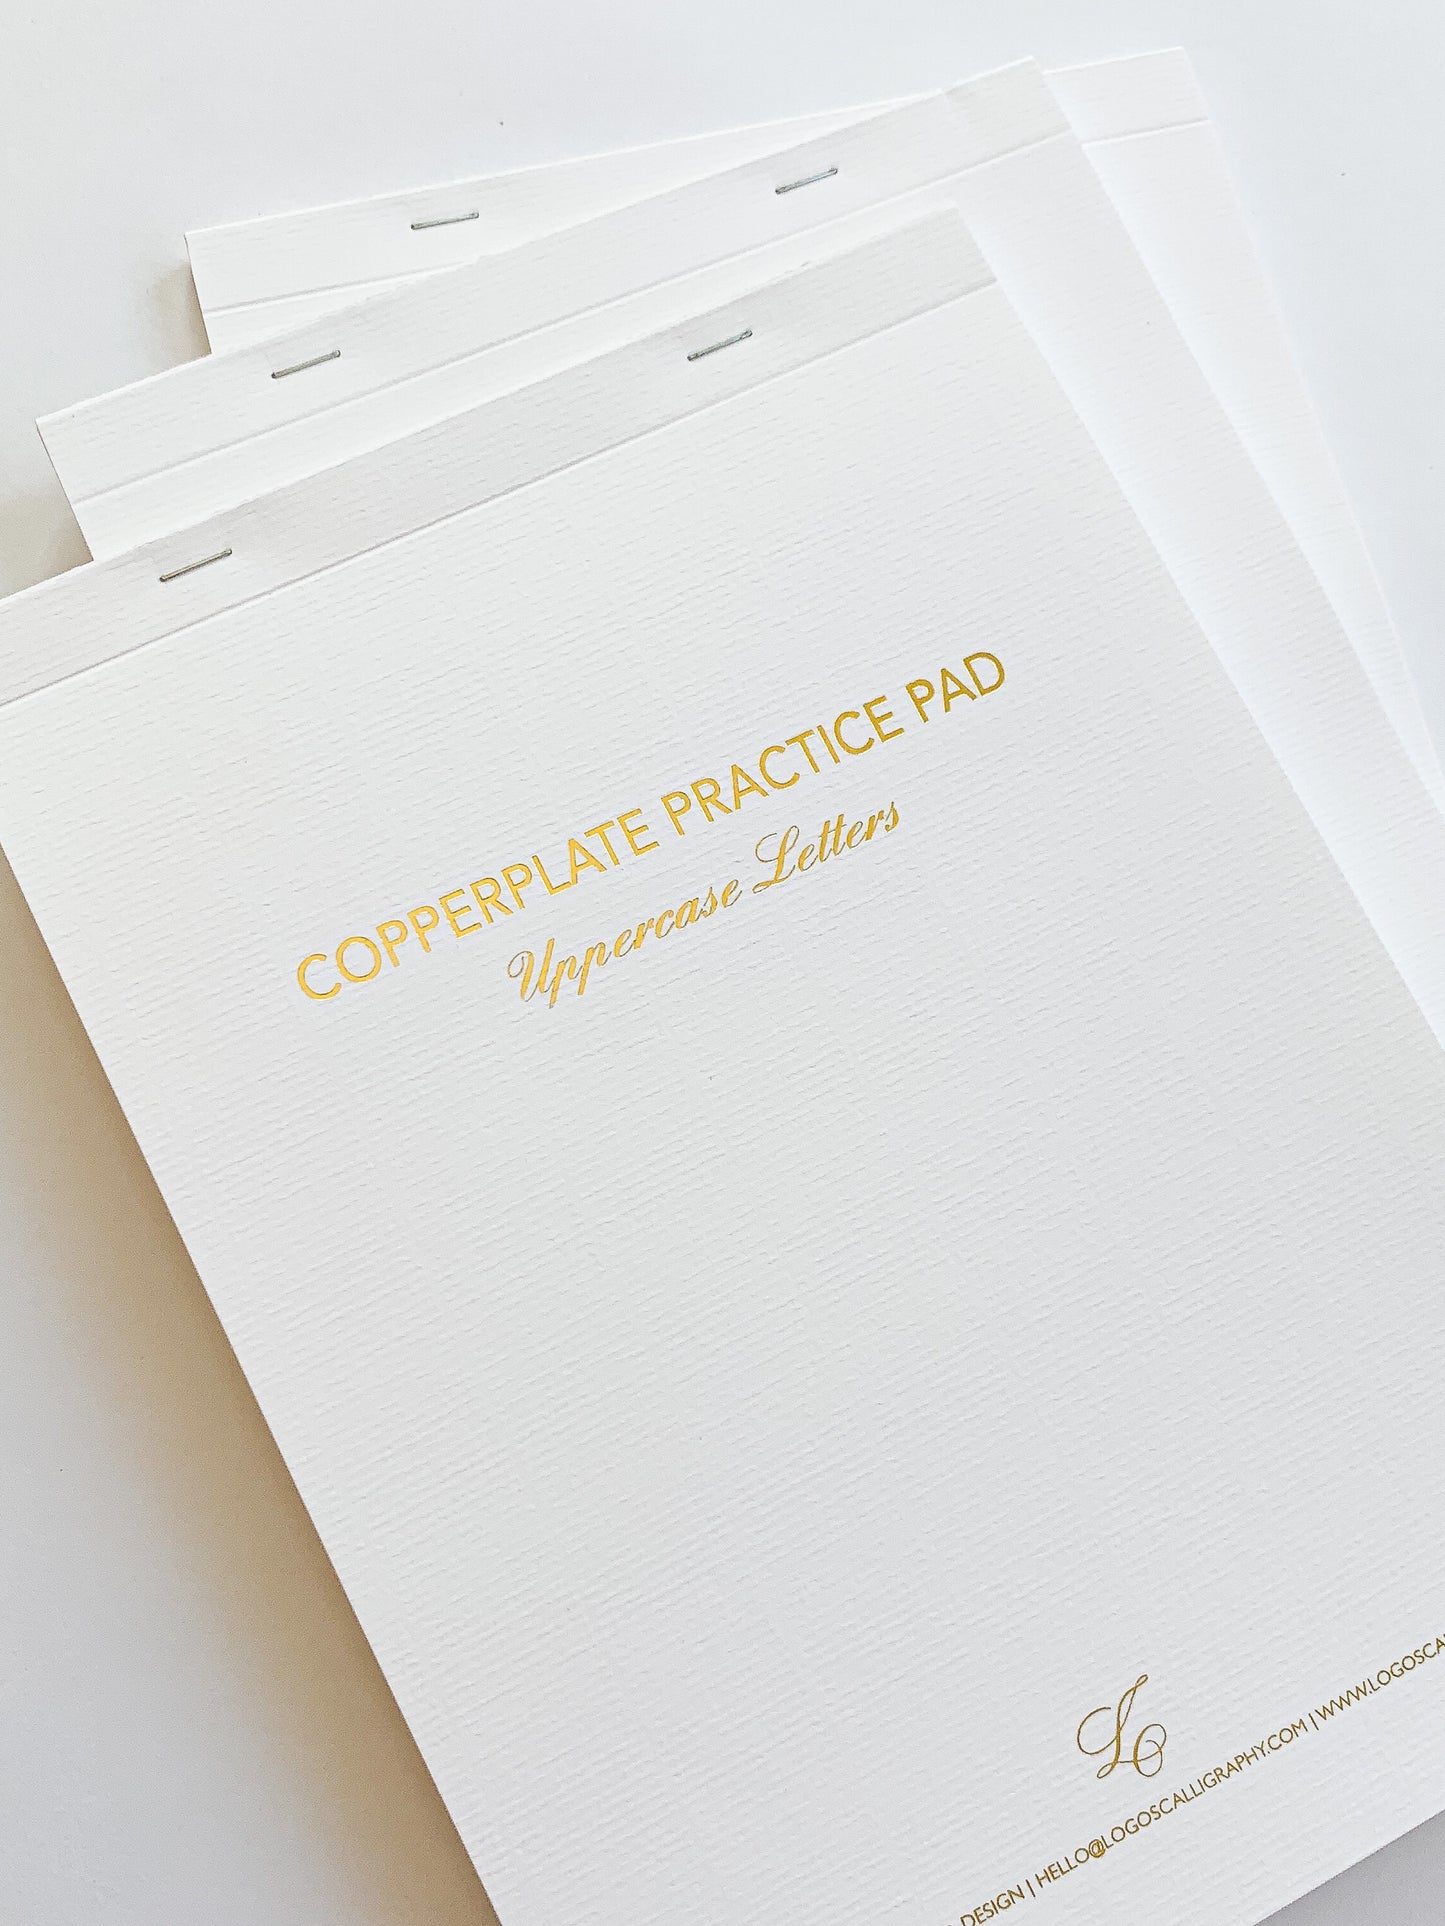 Copperplate Practice Pad - Uppercase Letters